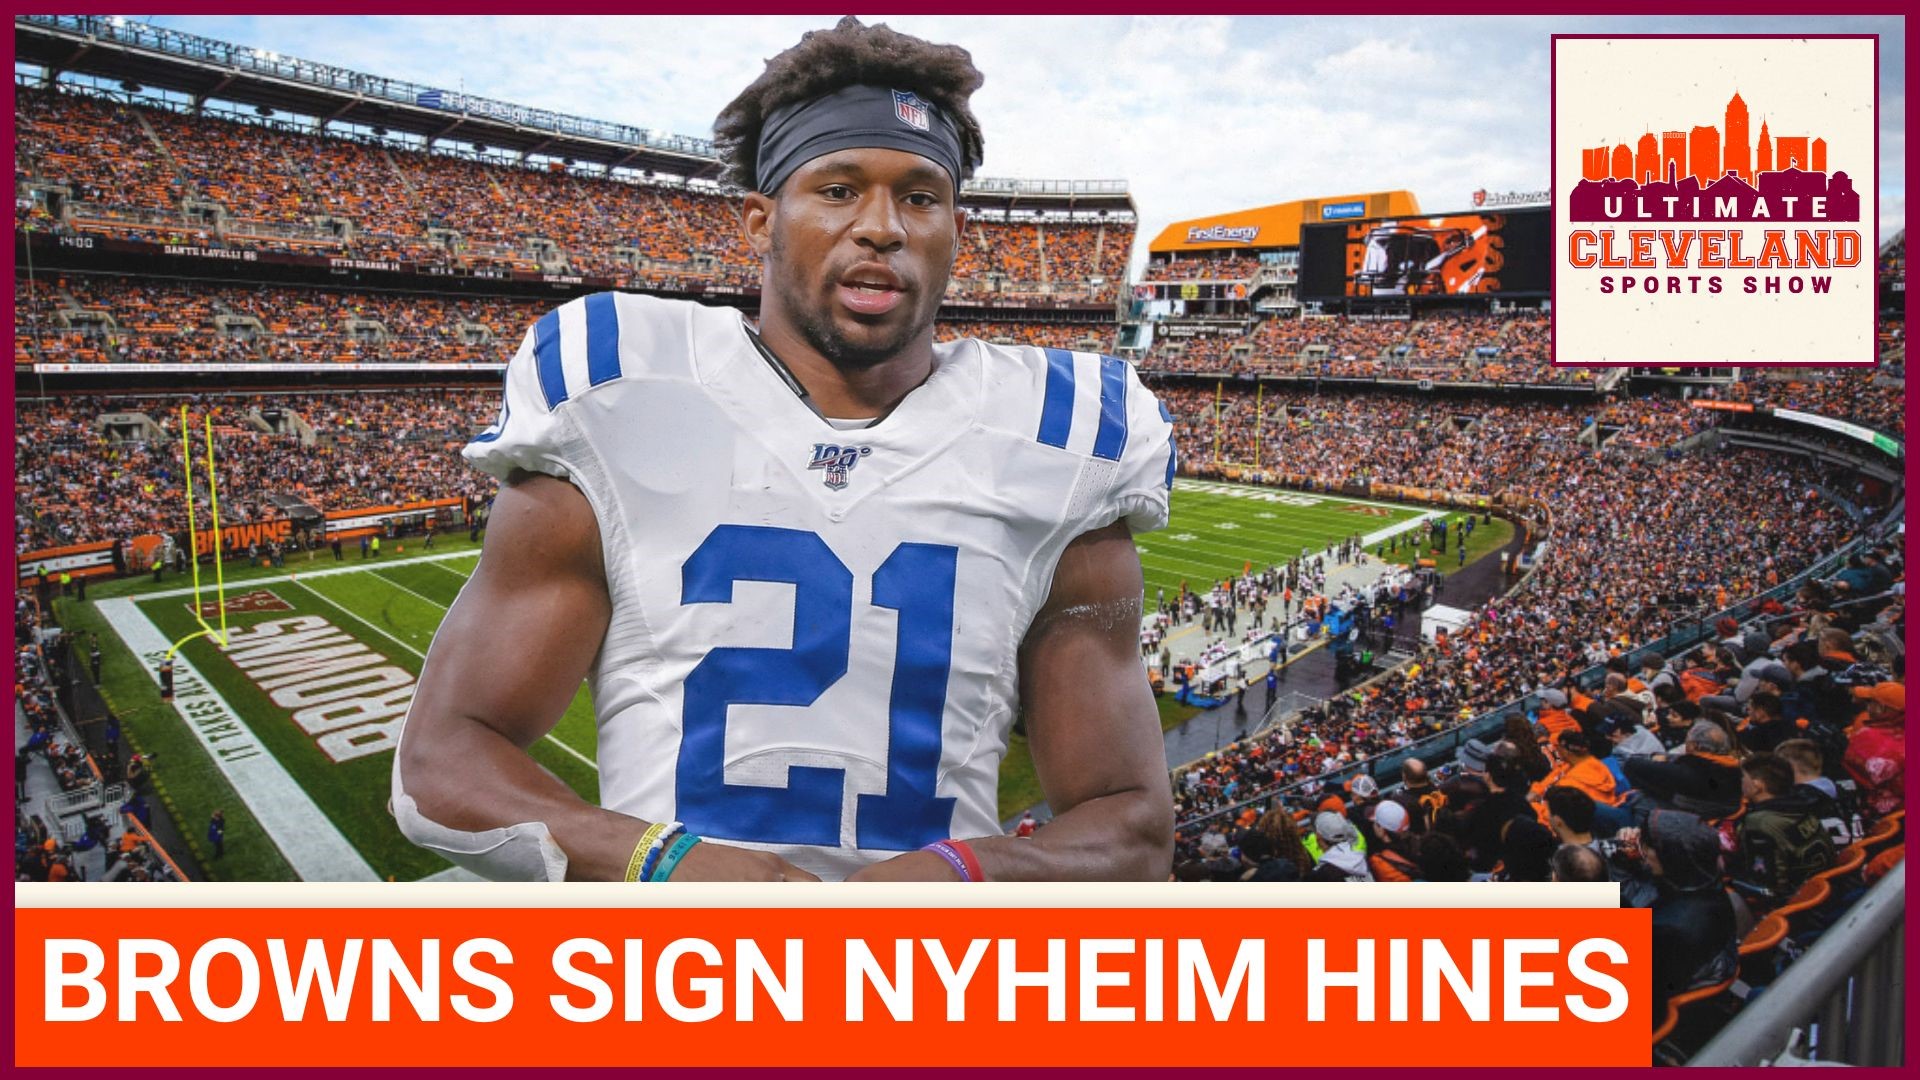 The Cleveland Browns add Nyheim Nines to their running back room | could be a return specialist as well